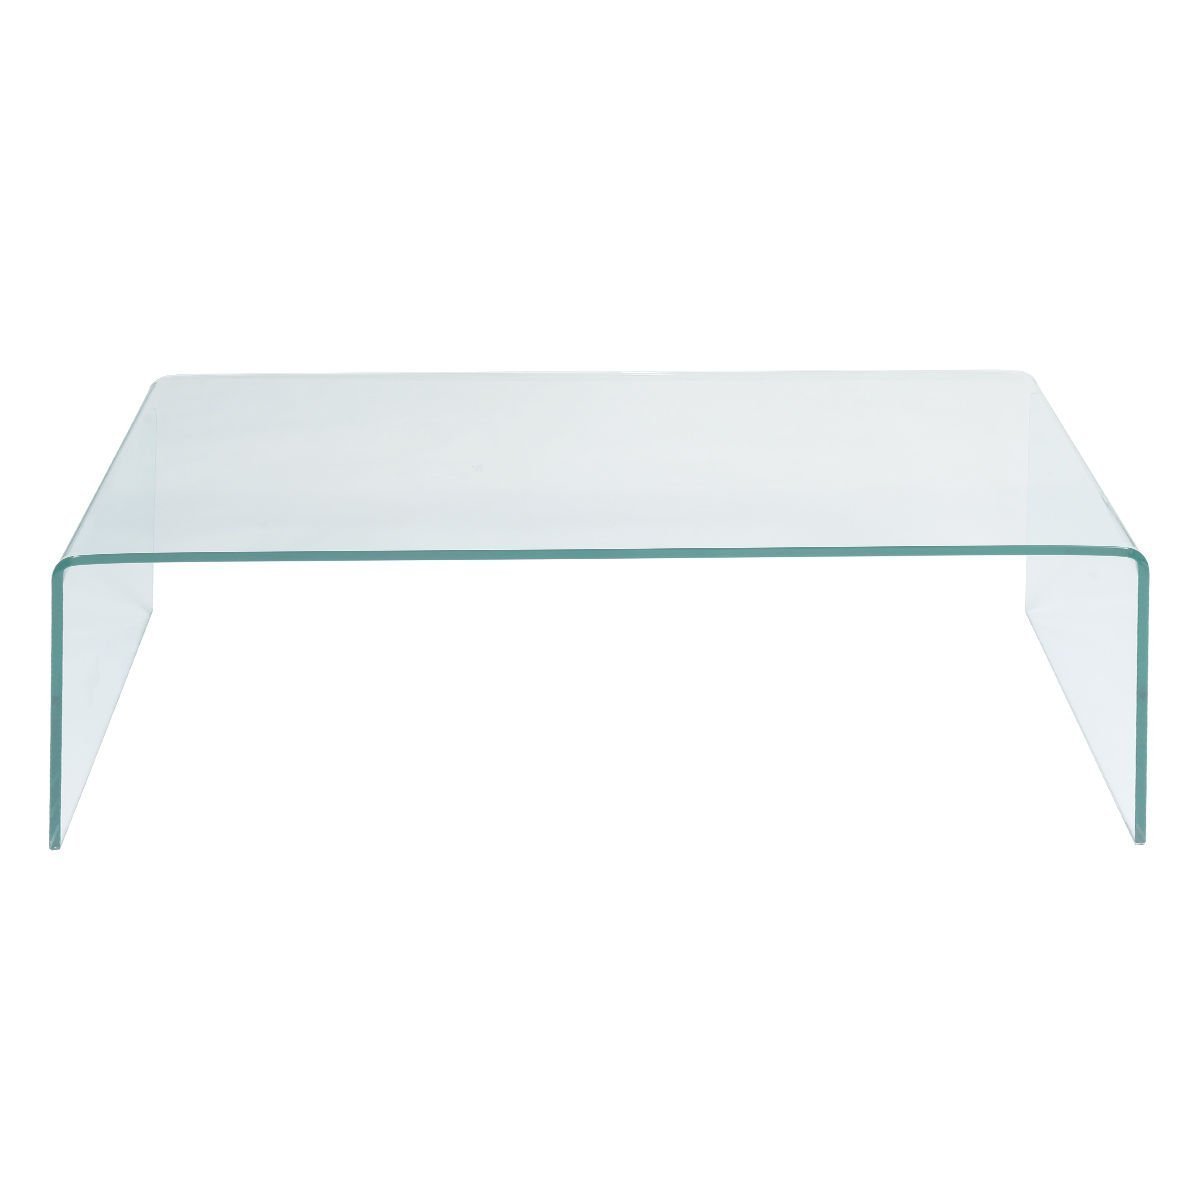 Copy of Copy of Copy of Glass coffee table